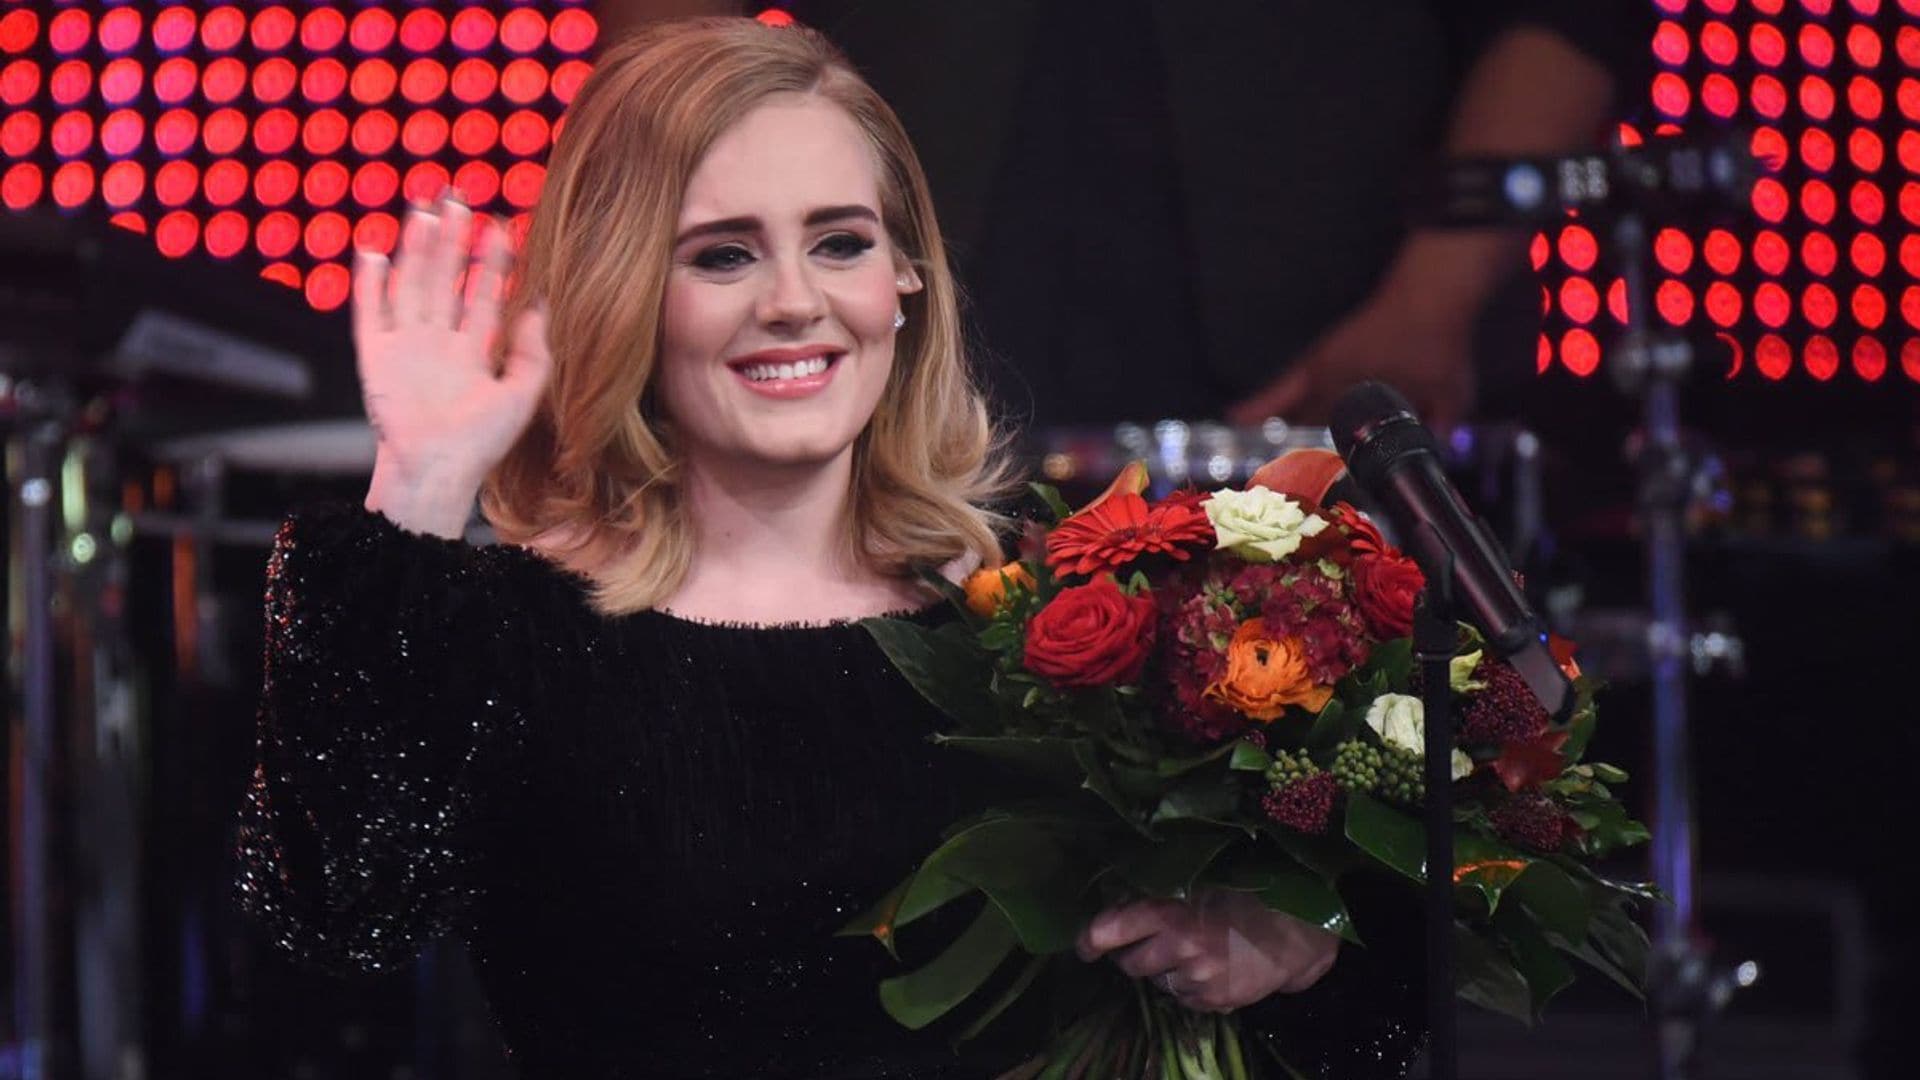 Adele Praises “Untamed” Book for Helping Her Find Her Joy and Freedom